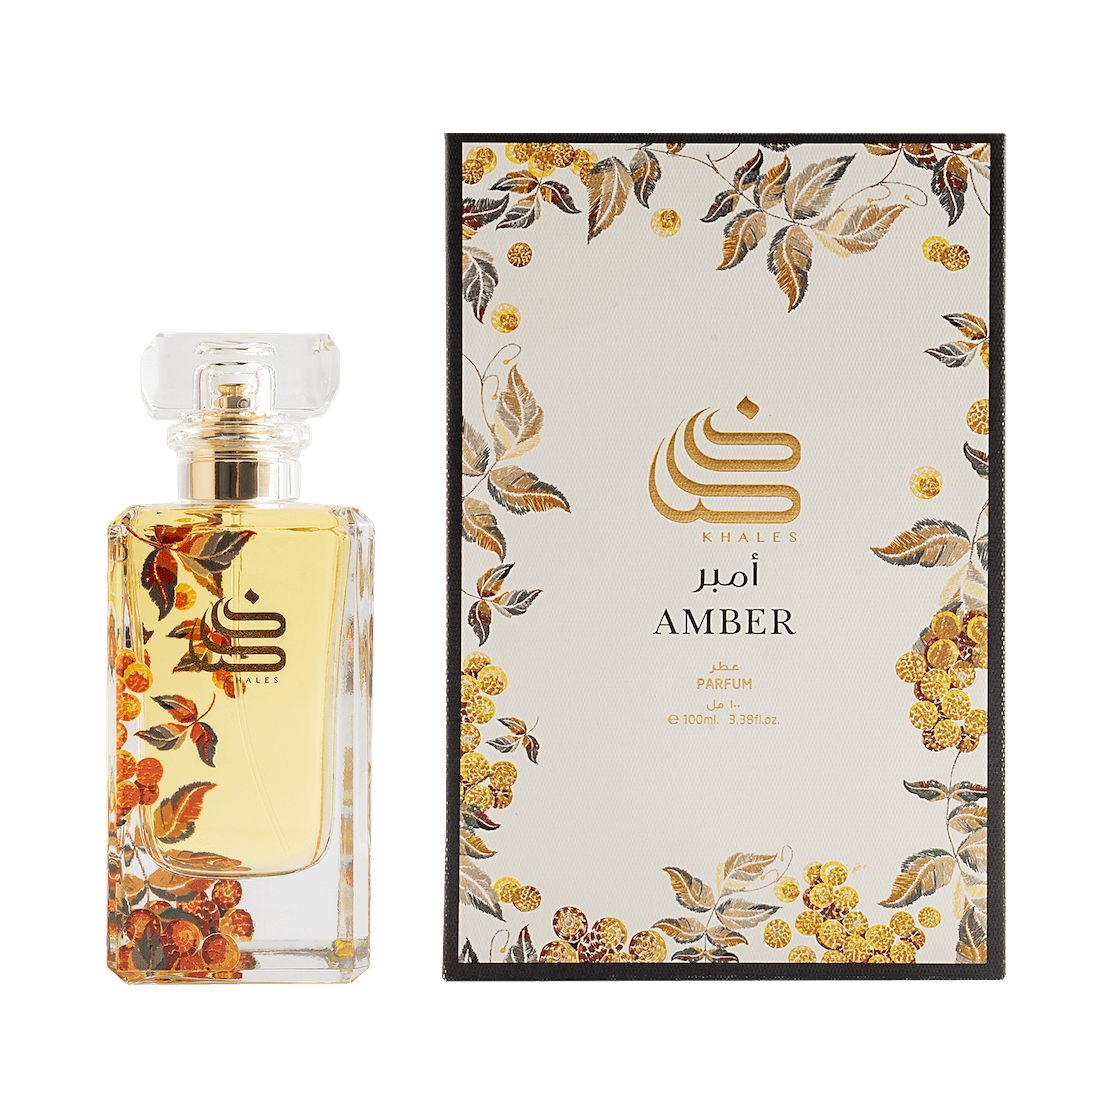 Amber (100ml) - Khales - MHGboutique - perfumes - fragrances - oud - online shopping - free shipping - top perfumes - best perfumes